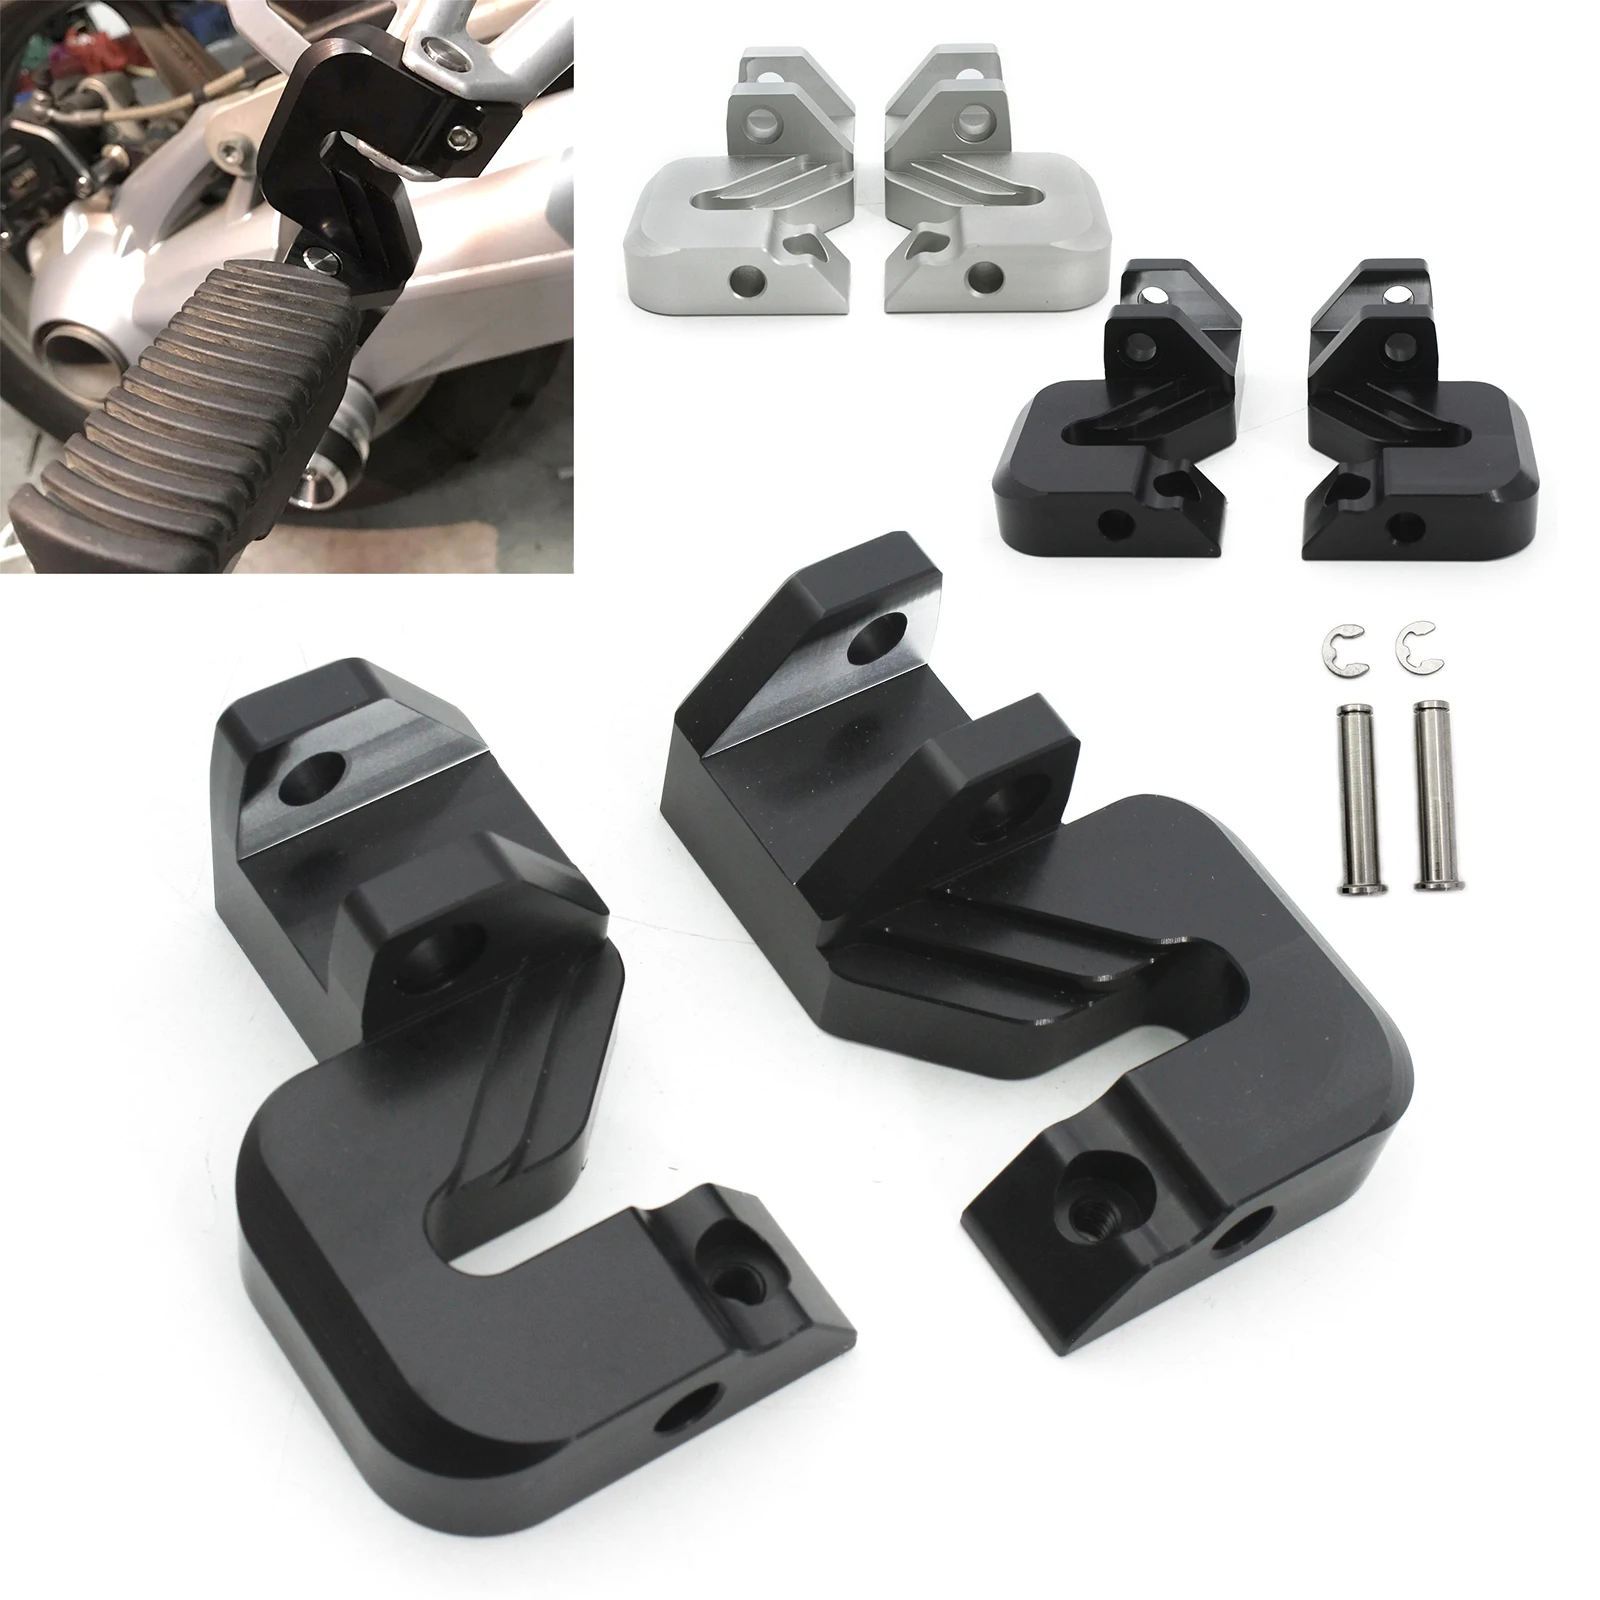 Rear Lower Adapter Passenger Footrest Relocation For BMW R1200GS 2005-2012 Adventure 2006-2013 Motorcycle Aluminum